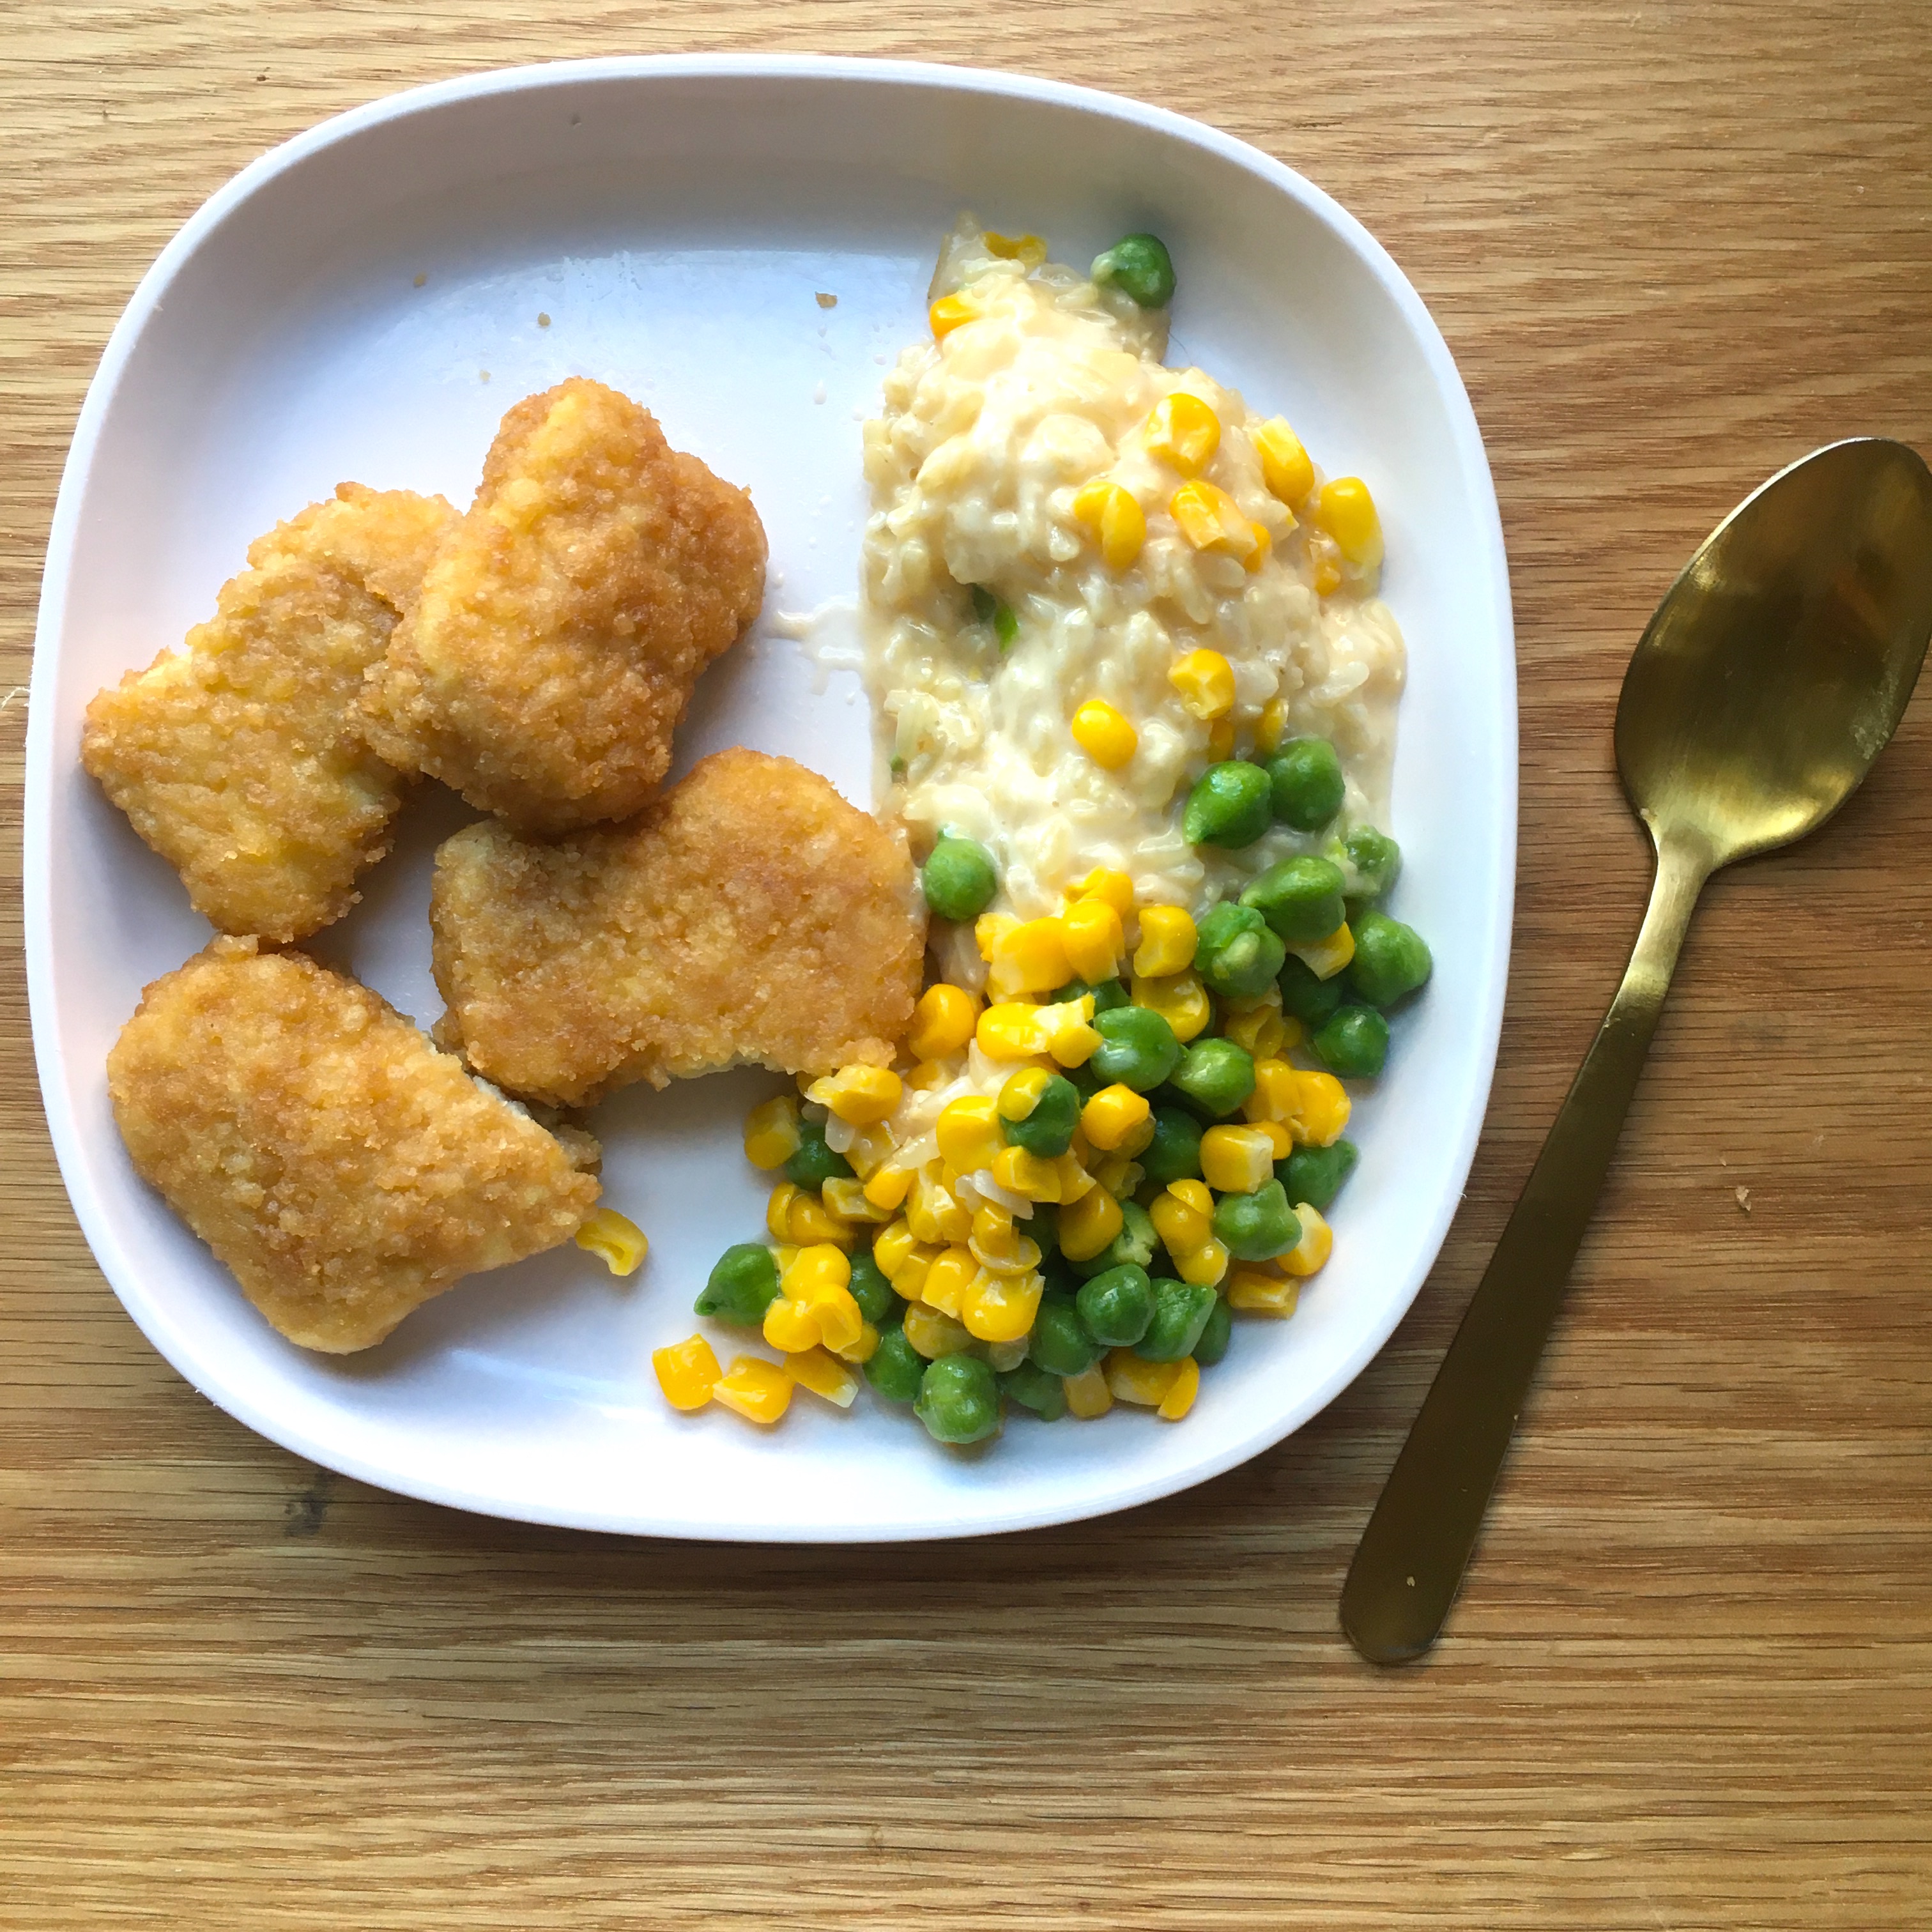 Yumble Subscription chicken nuggets, cheesy rice, and veggies meal